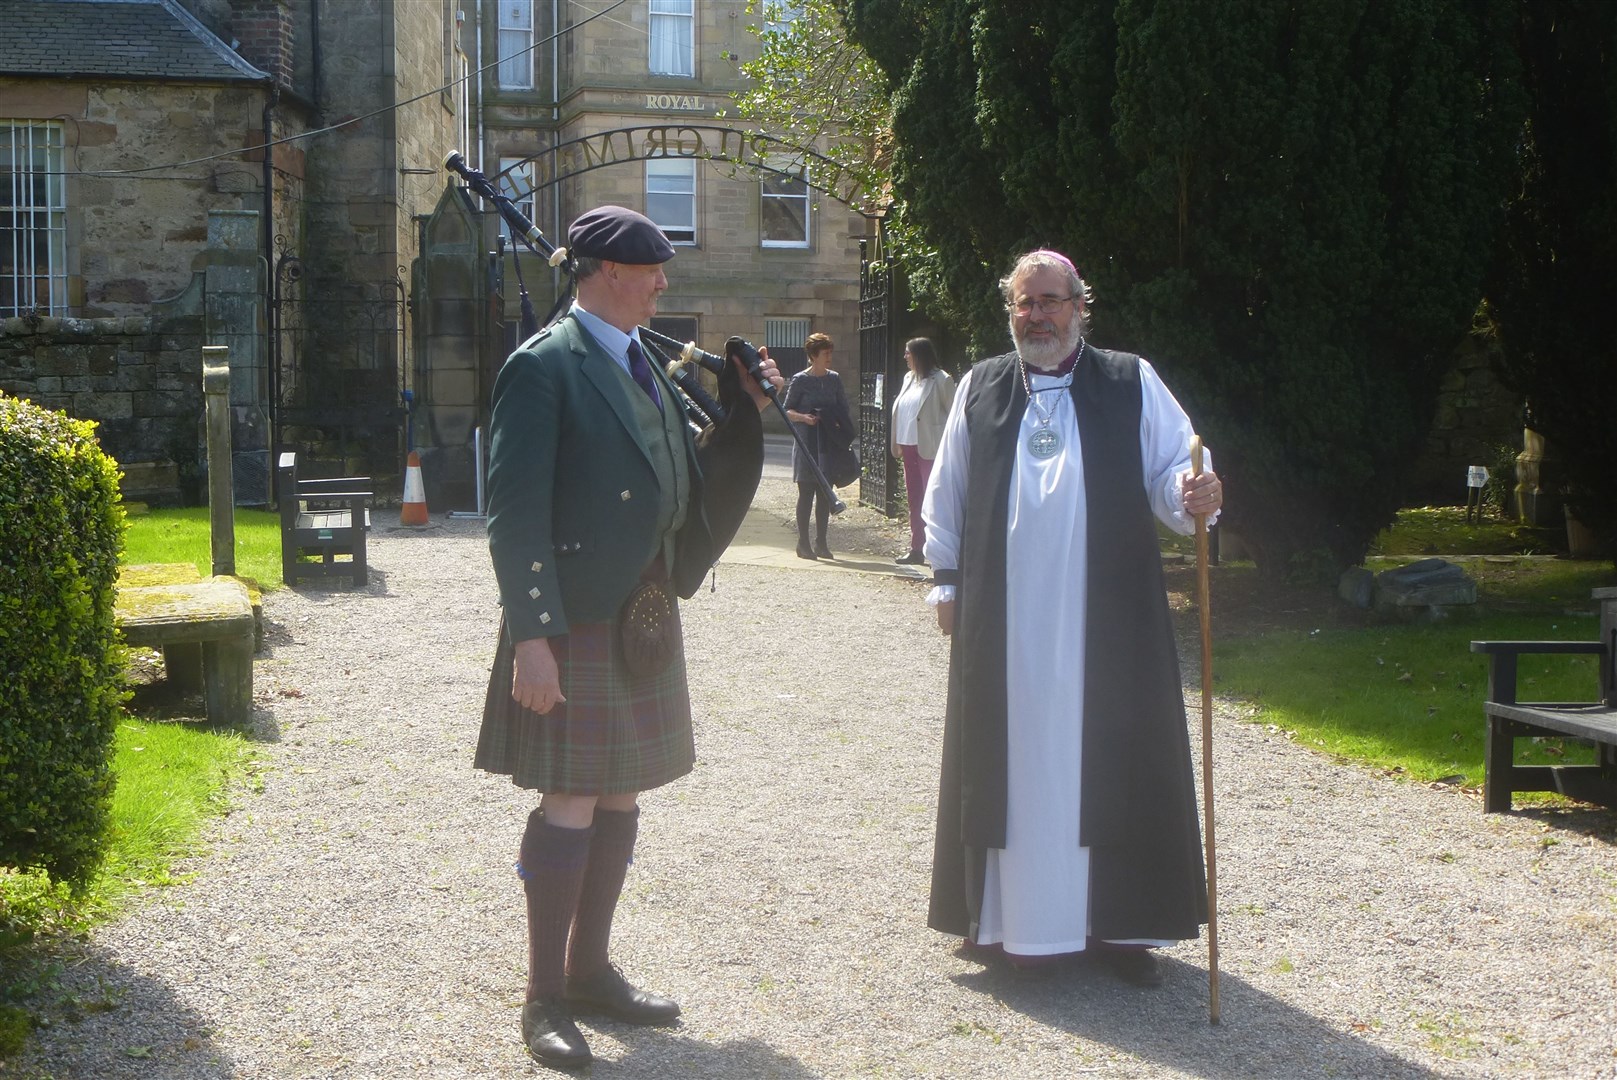 The service of redidication took place in Tain. Duncan Macgillvray, piper talking to the Bishop Mark Strange.